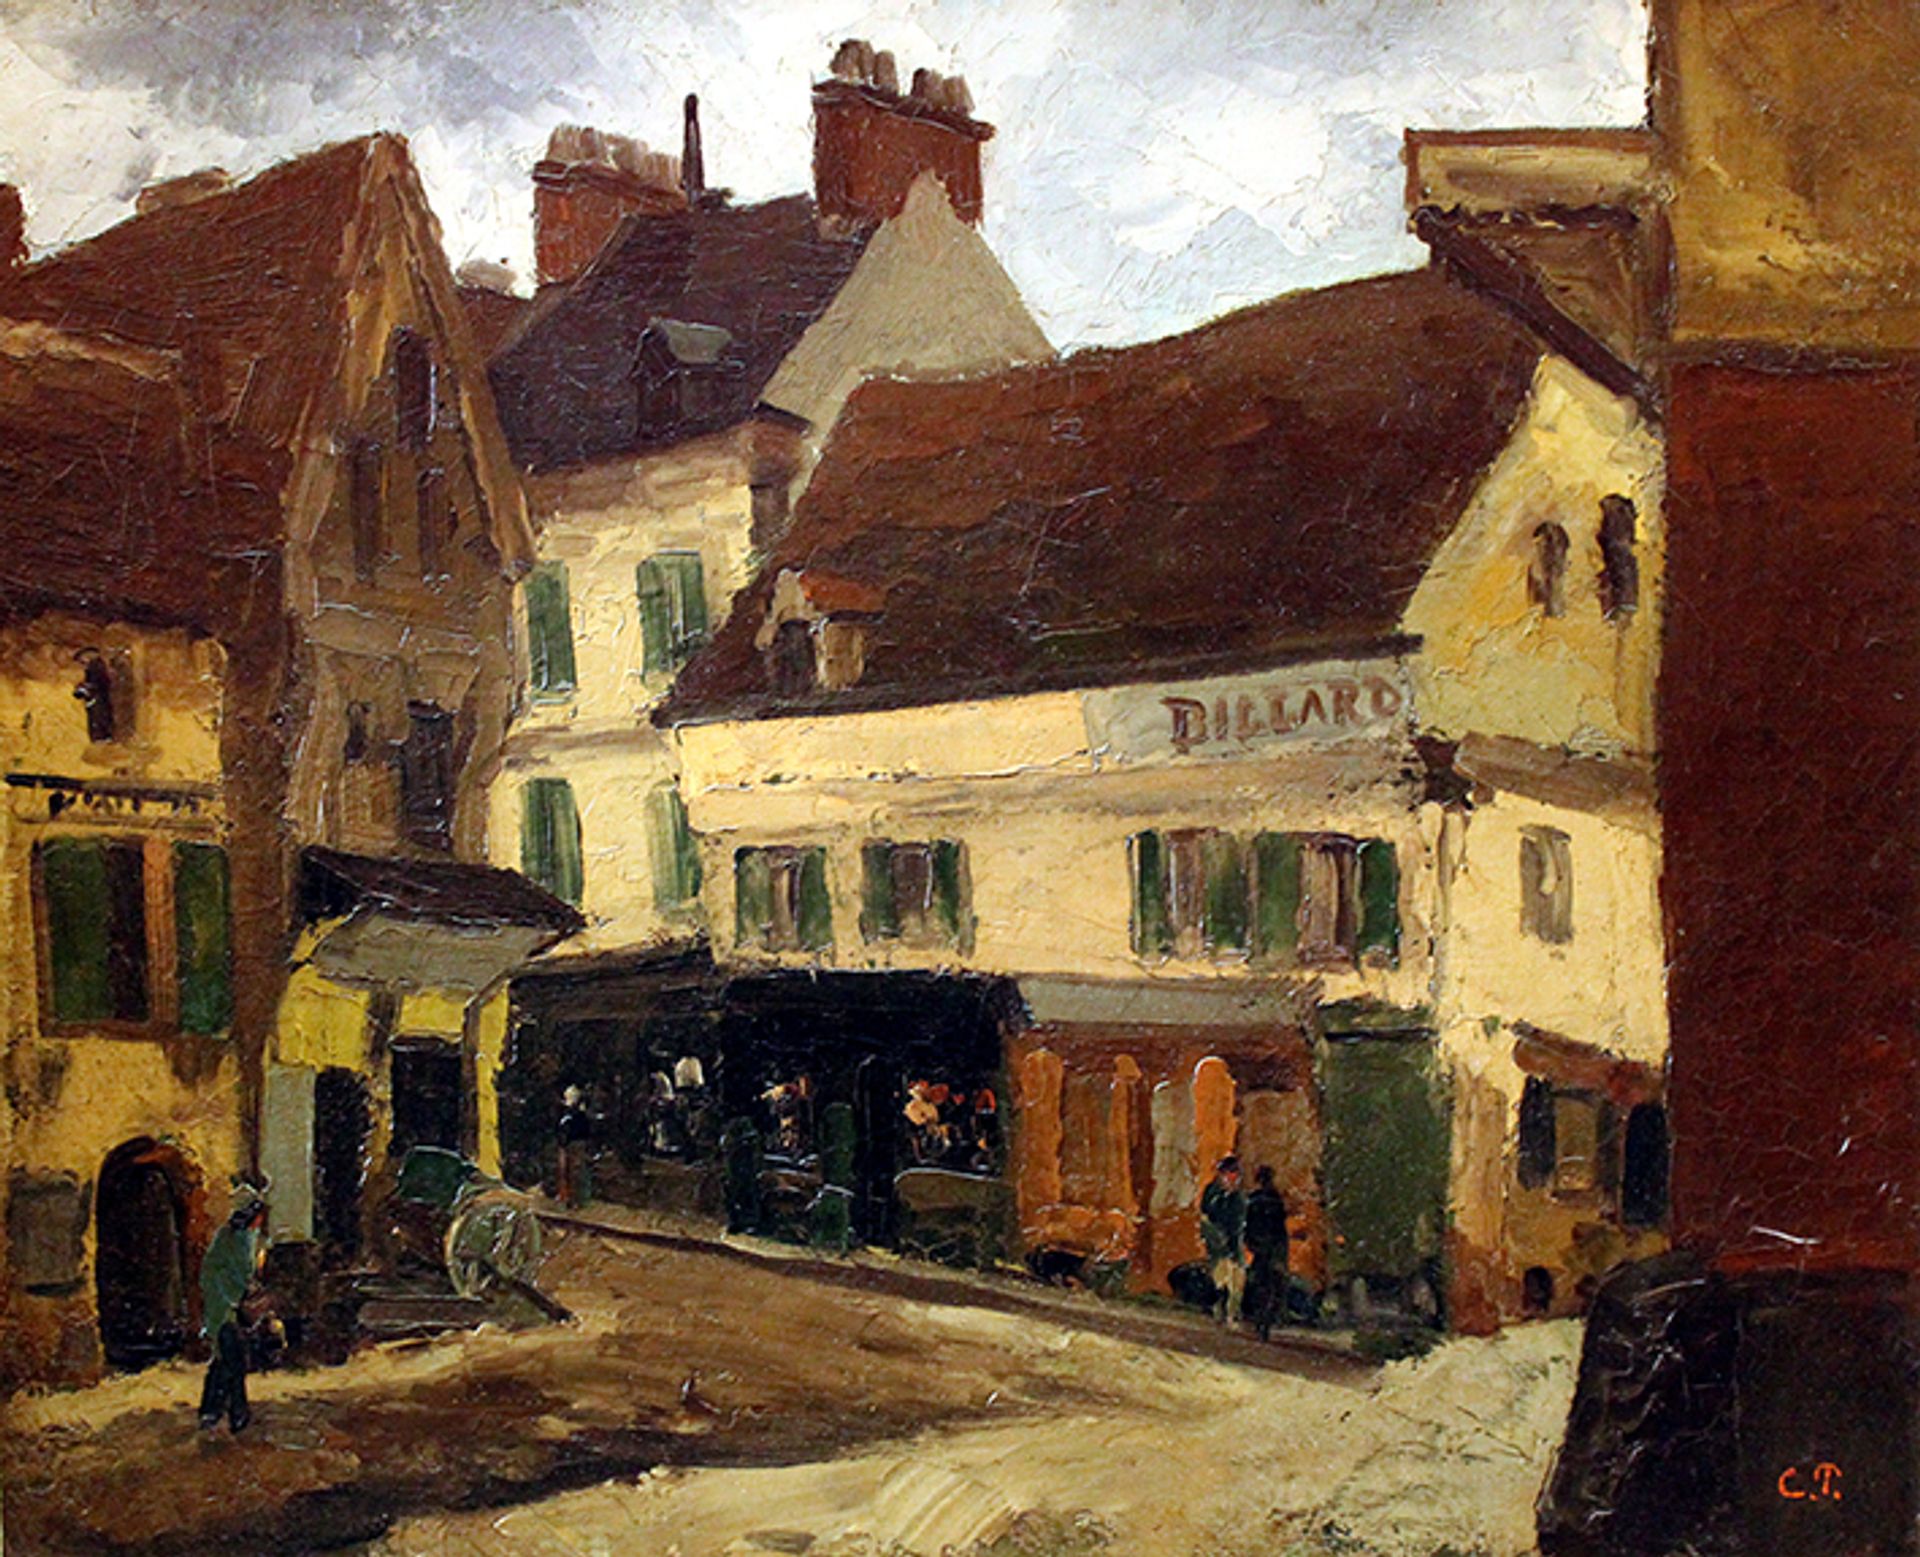 Camille Pissaroo, Une place à la Roche-Guyon (1867) was bought  by the National Galerie in 1961 from A. Tooth, London. On 14 April Hermann Parzinger, the chair of the museums of Berlin, agreed to "restitute" the looted painting, asking for an agreement to keep the work at the museum. 